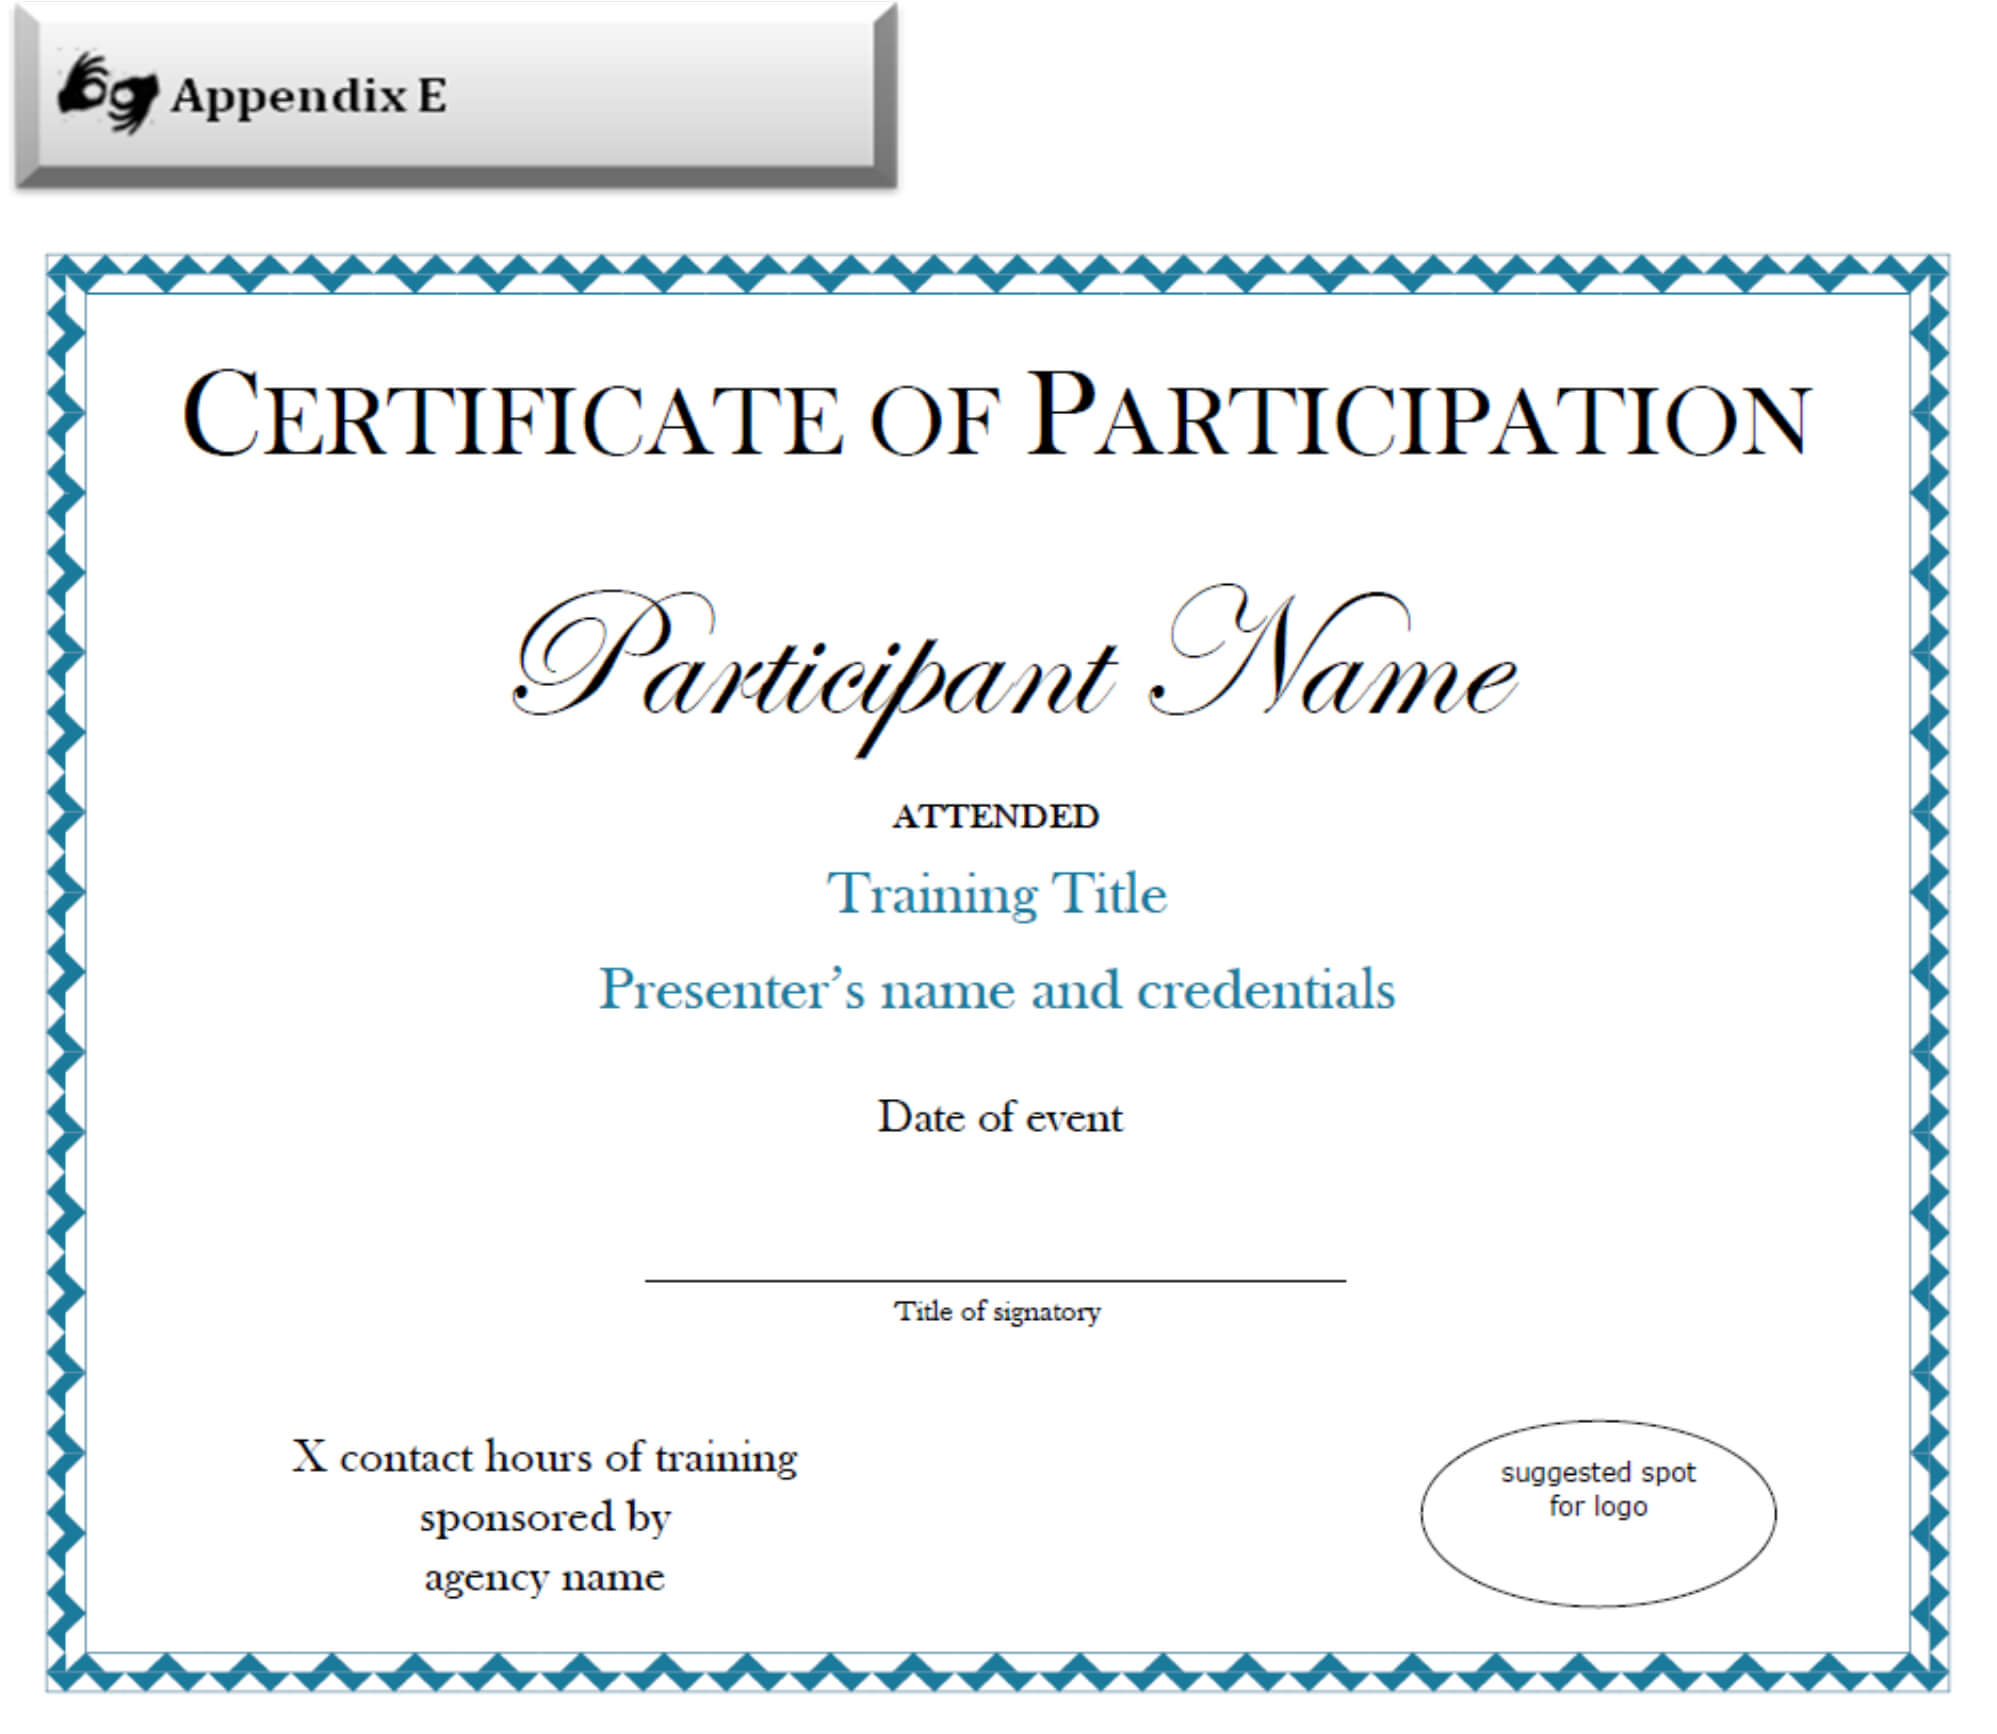 Certificate Of Participation Sample Free Download Regarding Certification Of Participation Free Template